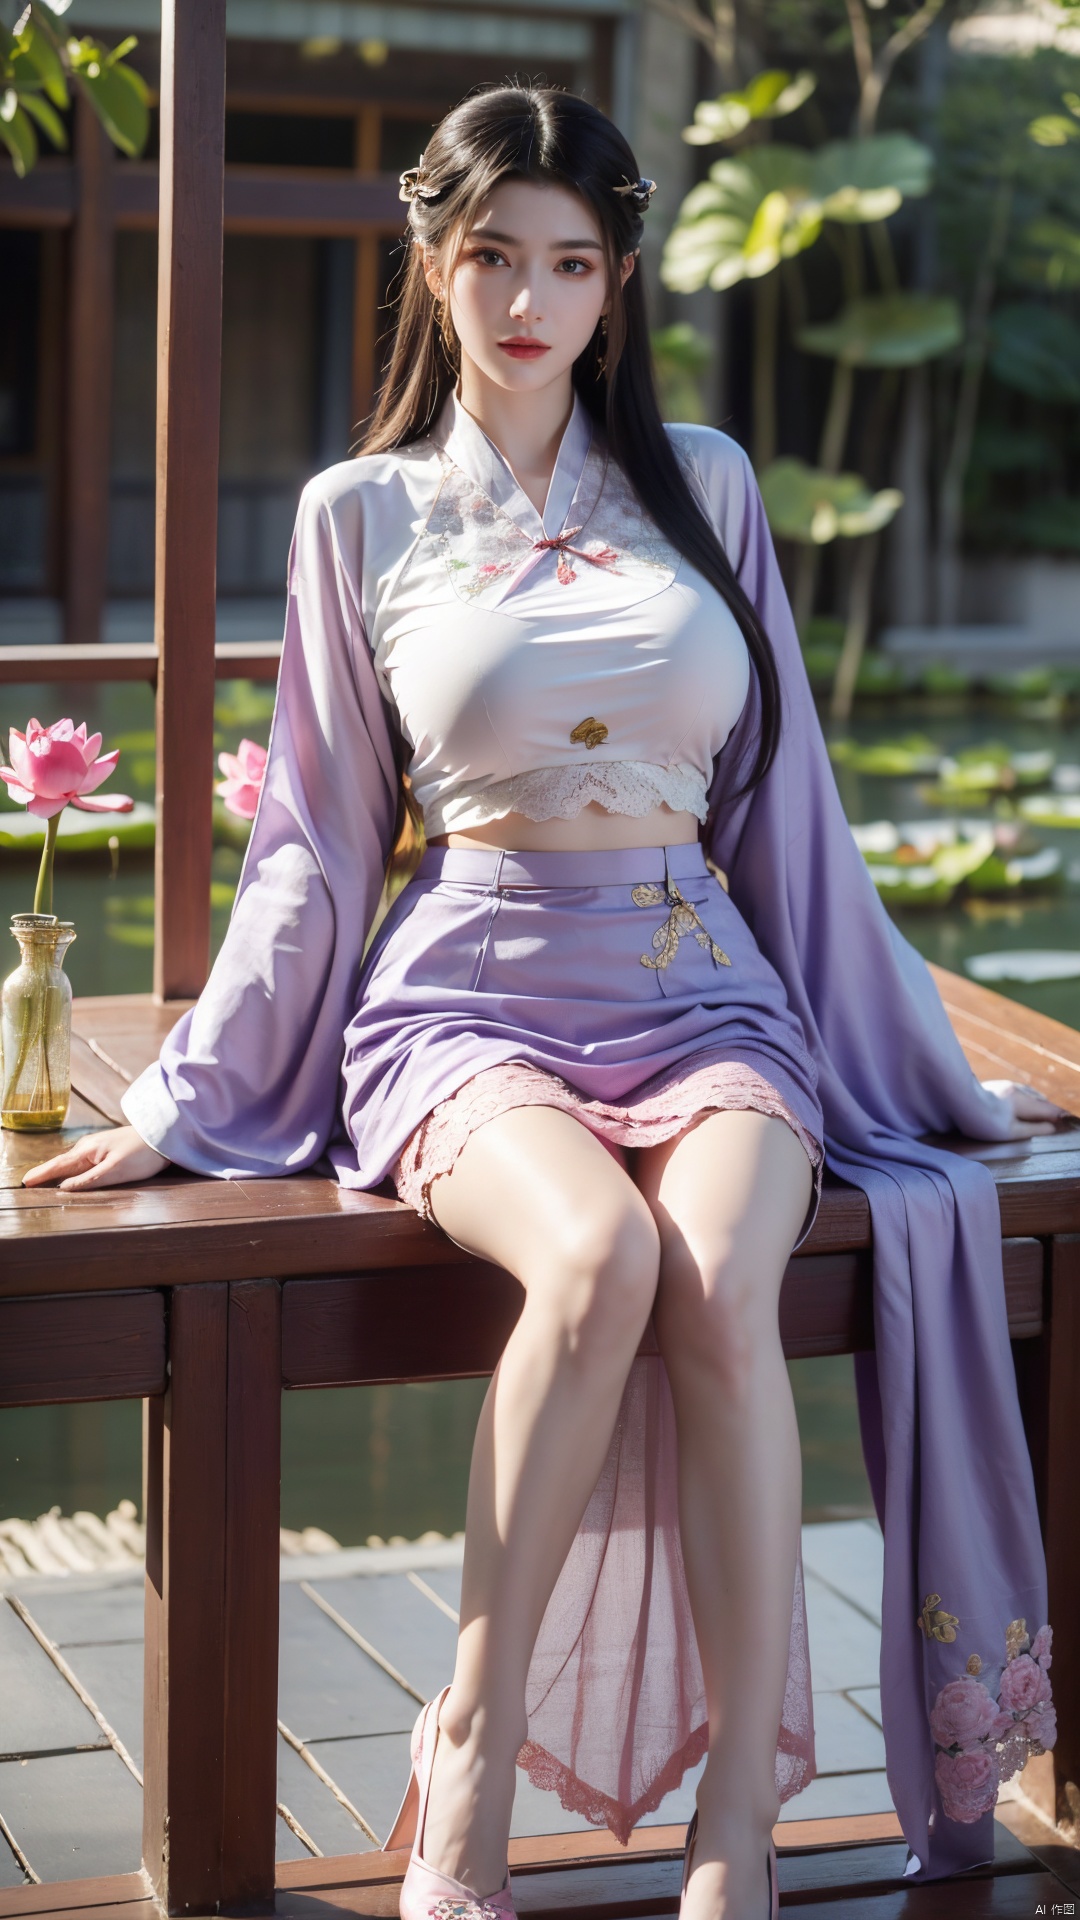  (1girl:1.1), (Lace purple skirt:1.39), on Stomach,aqua_earrings,Lights, lanterns, chang,(big breasts:1.56),hanfu, Best quality, Realistic, photorealistic, masterpiece, extremely detailed CG unity 8k wallpaper, best illumination, best shadow, huge filesize ,(huge breasts:1.59) incredibly absurdres, absurdres, looking at viewer, transparent, smog, gauze, vase, petals, room, ancient Chinese style, detailed background, wide shot background,
(((black hair))),(Sitting on the lotus pond porch:1.49) ,(A pond full of pink lotus flowers:1.5),close up of 1girl,Hairpins,hair ornament,hair wings,slim,narrow waist,perfect eyes,beautiful perfect face,pleasant smile,perfect female figure,detailed skin,charming,alluring,seductive,erotic,enchanting,delicate pattern,detailed complex and rich exquisite clothing detail,delicate intricate fabrics,
Morning Serenade In the gentle morning glow, (a woman in a pink lotus-patterned Hanfu stands in an indoor courtyard:1.36),(Chinese traditional dragon and phoenix embroidered Hanfu:1.3), admiring the tranquil garden scenery. The lotus-patterned Hanfu, embellished with silver-thread embroidery, is softly illuminated by the morning light. The light mint green Hanfu imparts a sense of calm and freshness, adorned with delicate lotus patterns, with a blurred background to enhance the peaceful atmosphere,